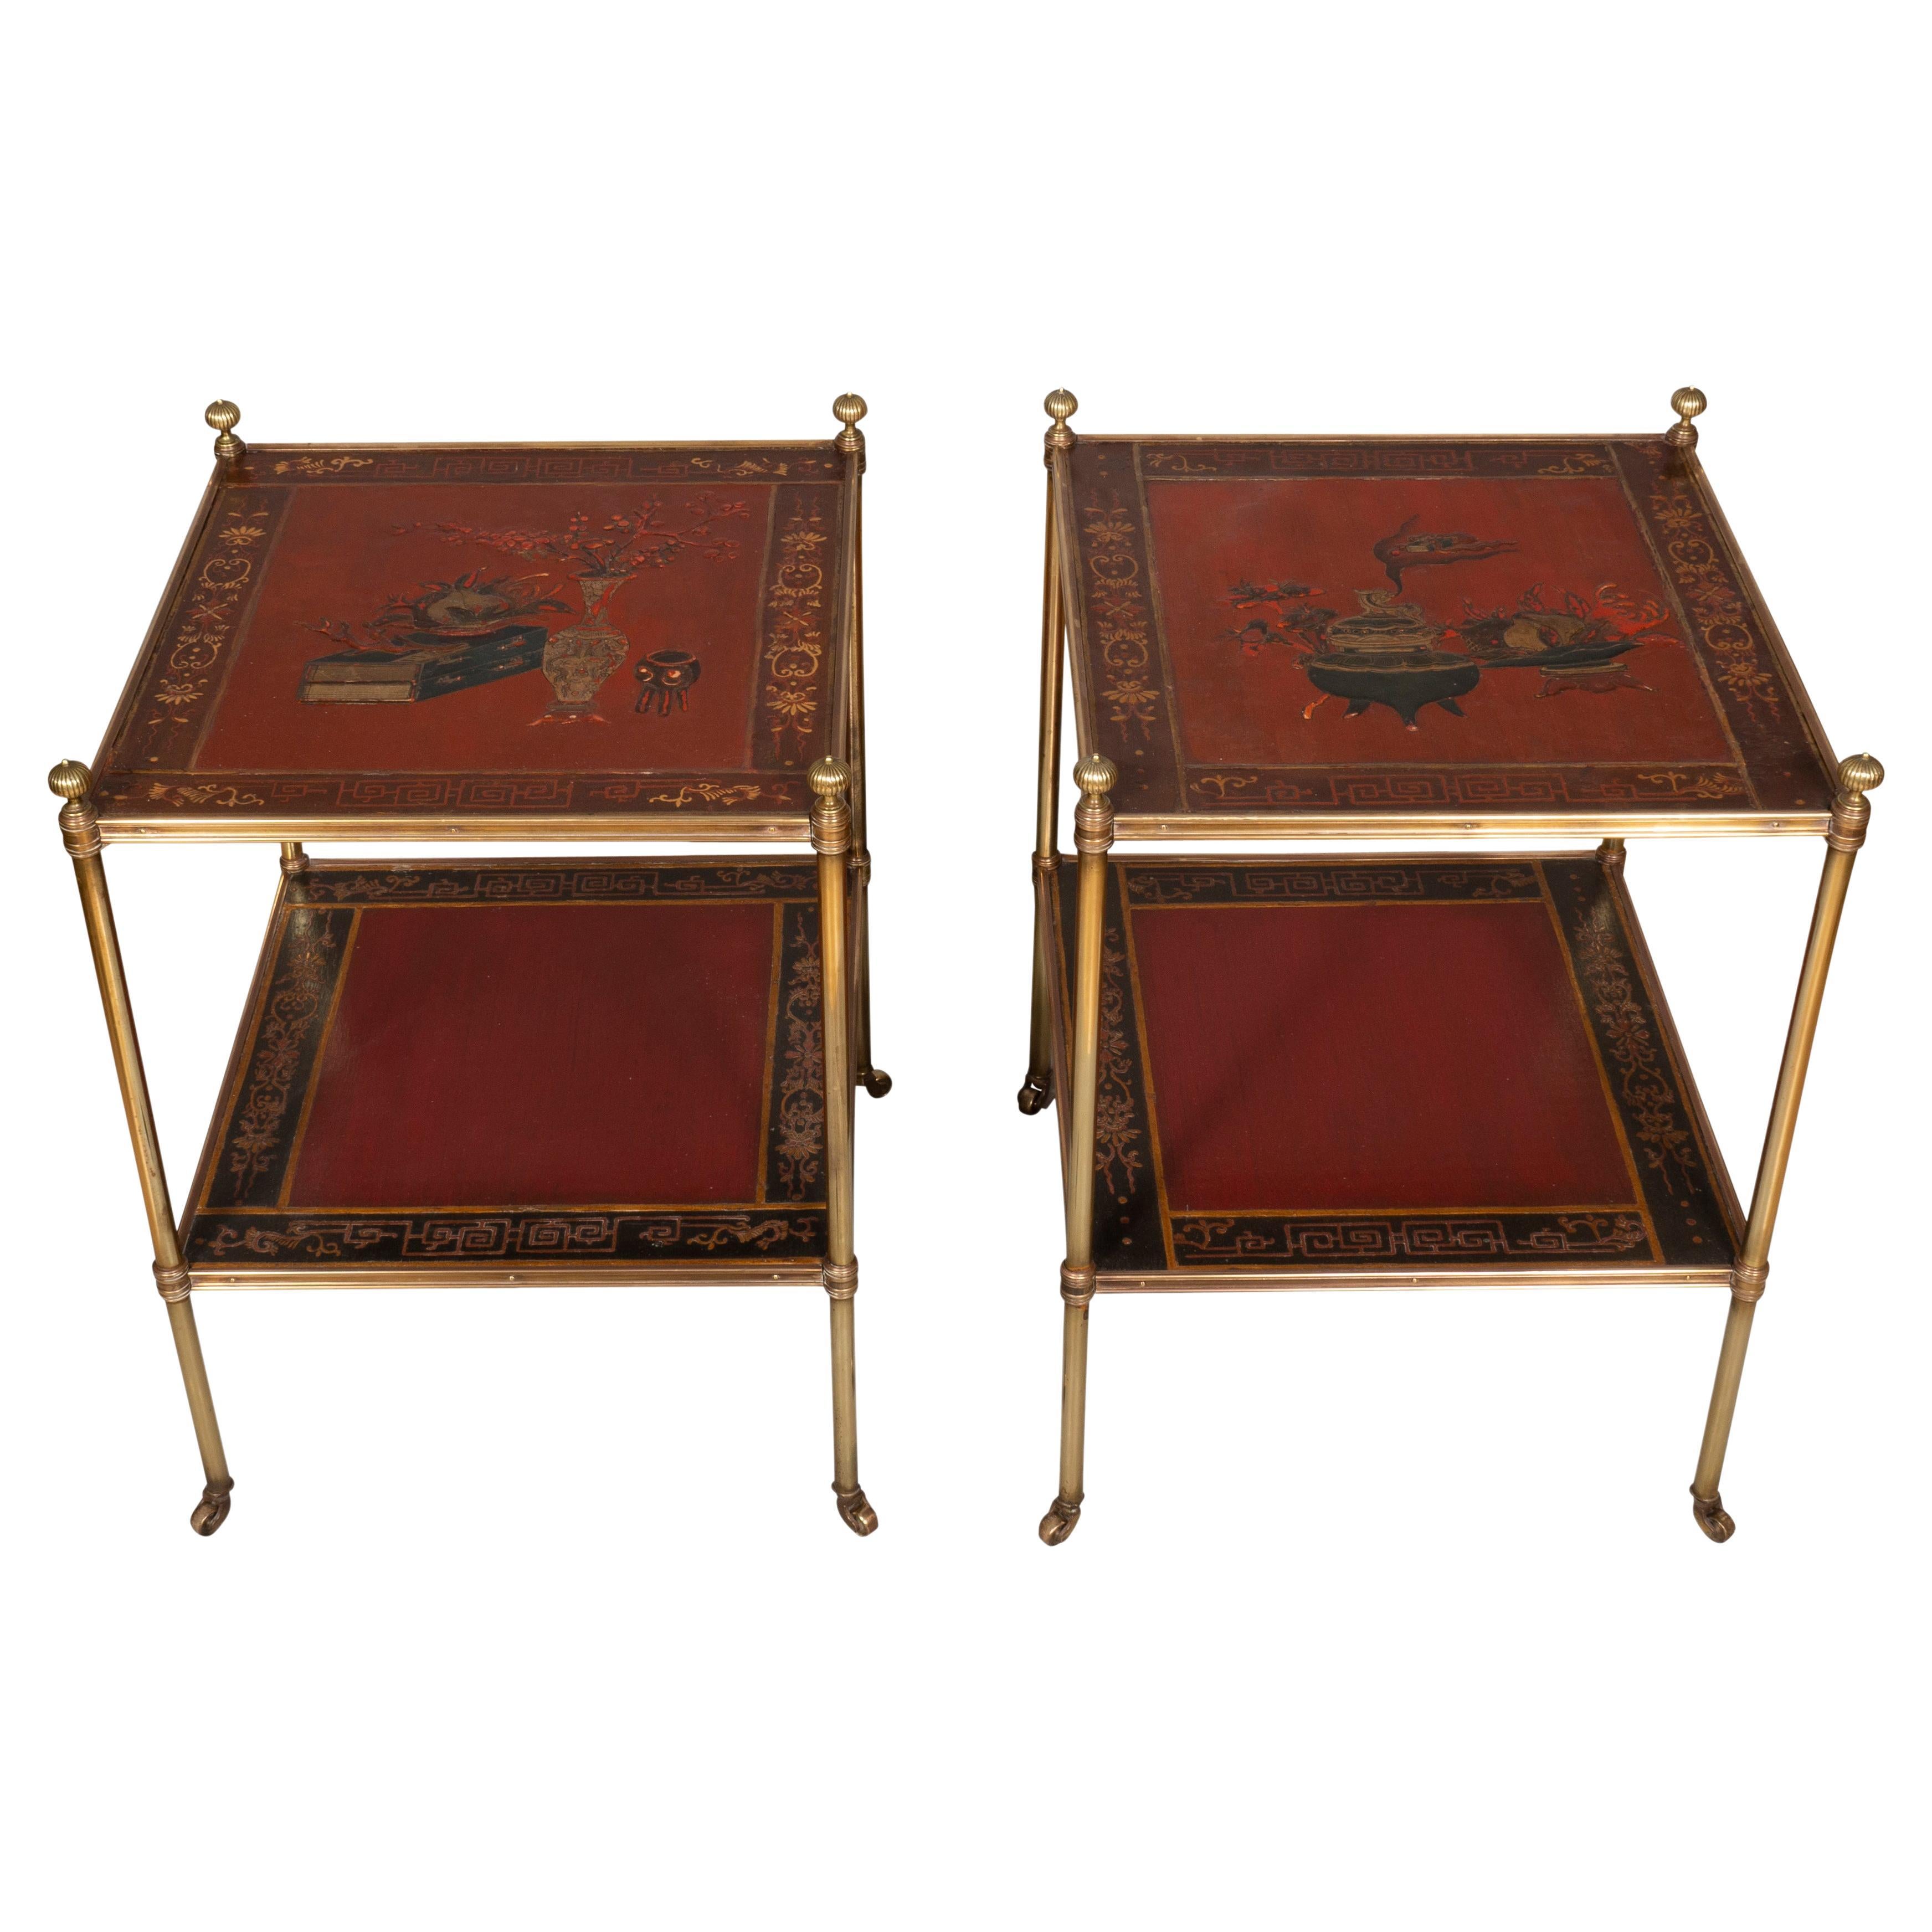 Neoclassical Pair of Brass and Chinoiserie Lacquer Etageres